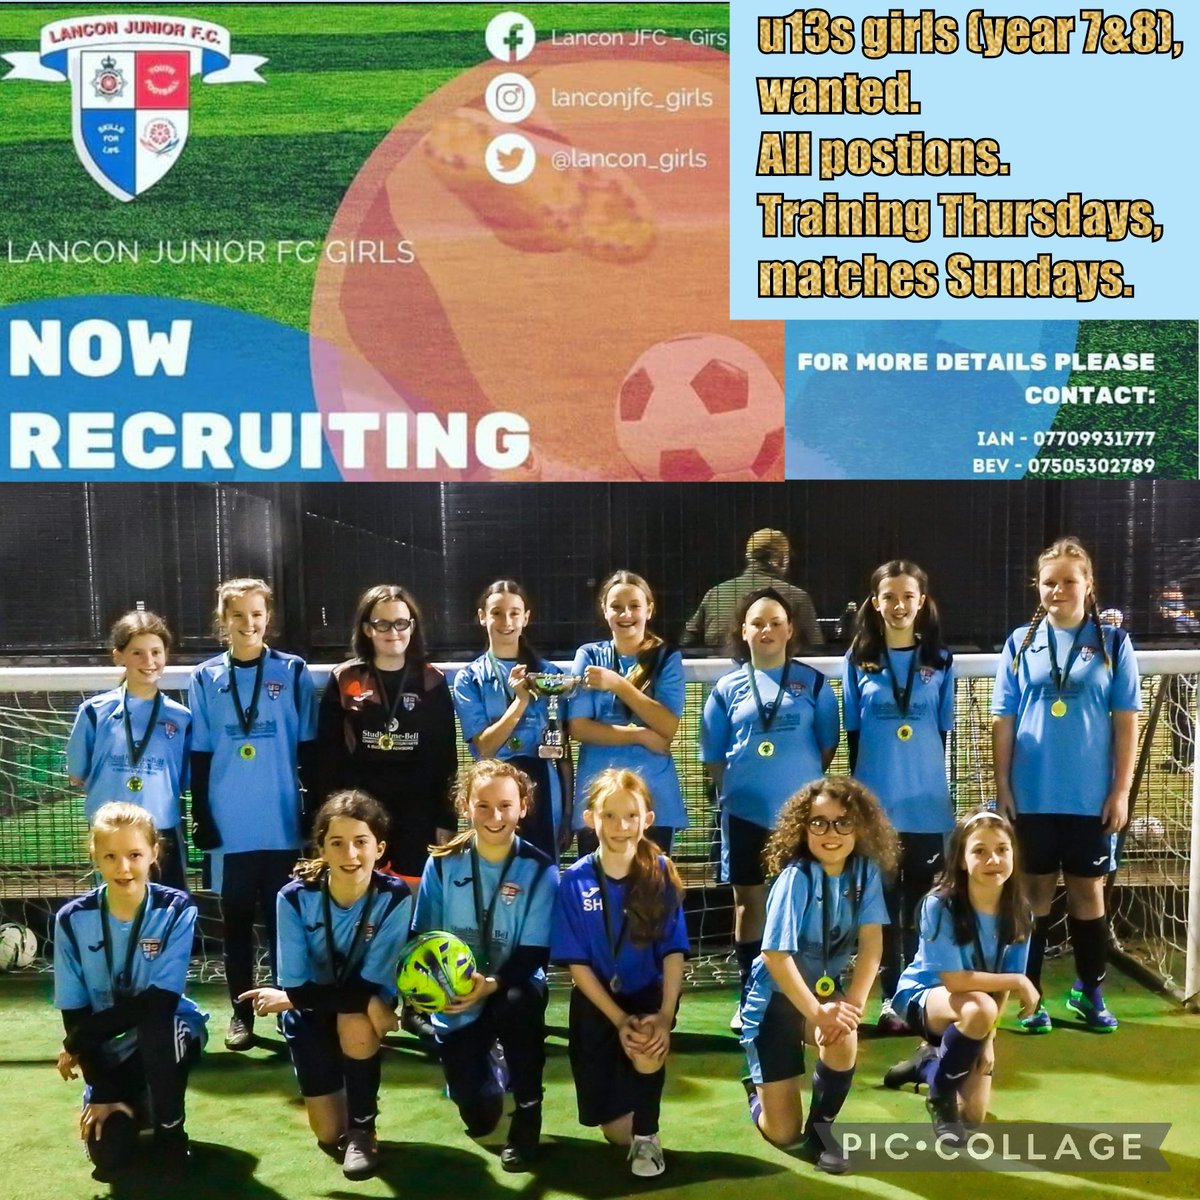 ⚽️Players wanted⚽️

We are looking for players to join our successful u13s (years 7&8) girls only football team. 

All abilities welcome!

@JfcLancon
@PdplGirls
@LFAWG
@charleyy_96
@GirlsFootballNw
@Teamgrassroots_
#lanconforlife